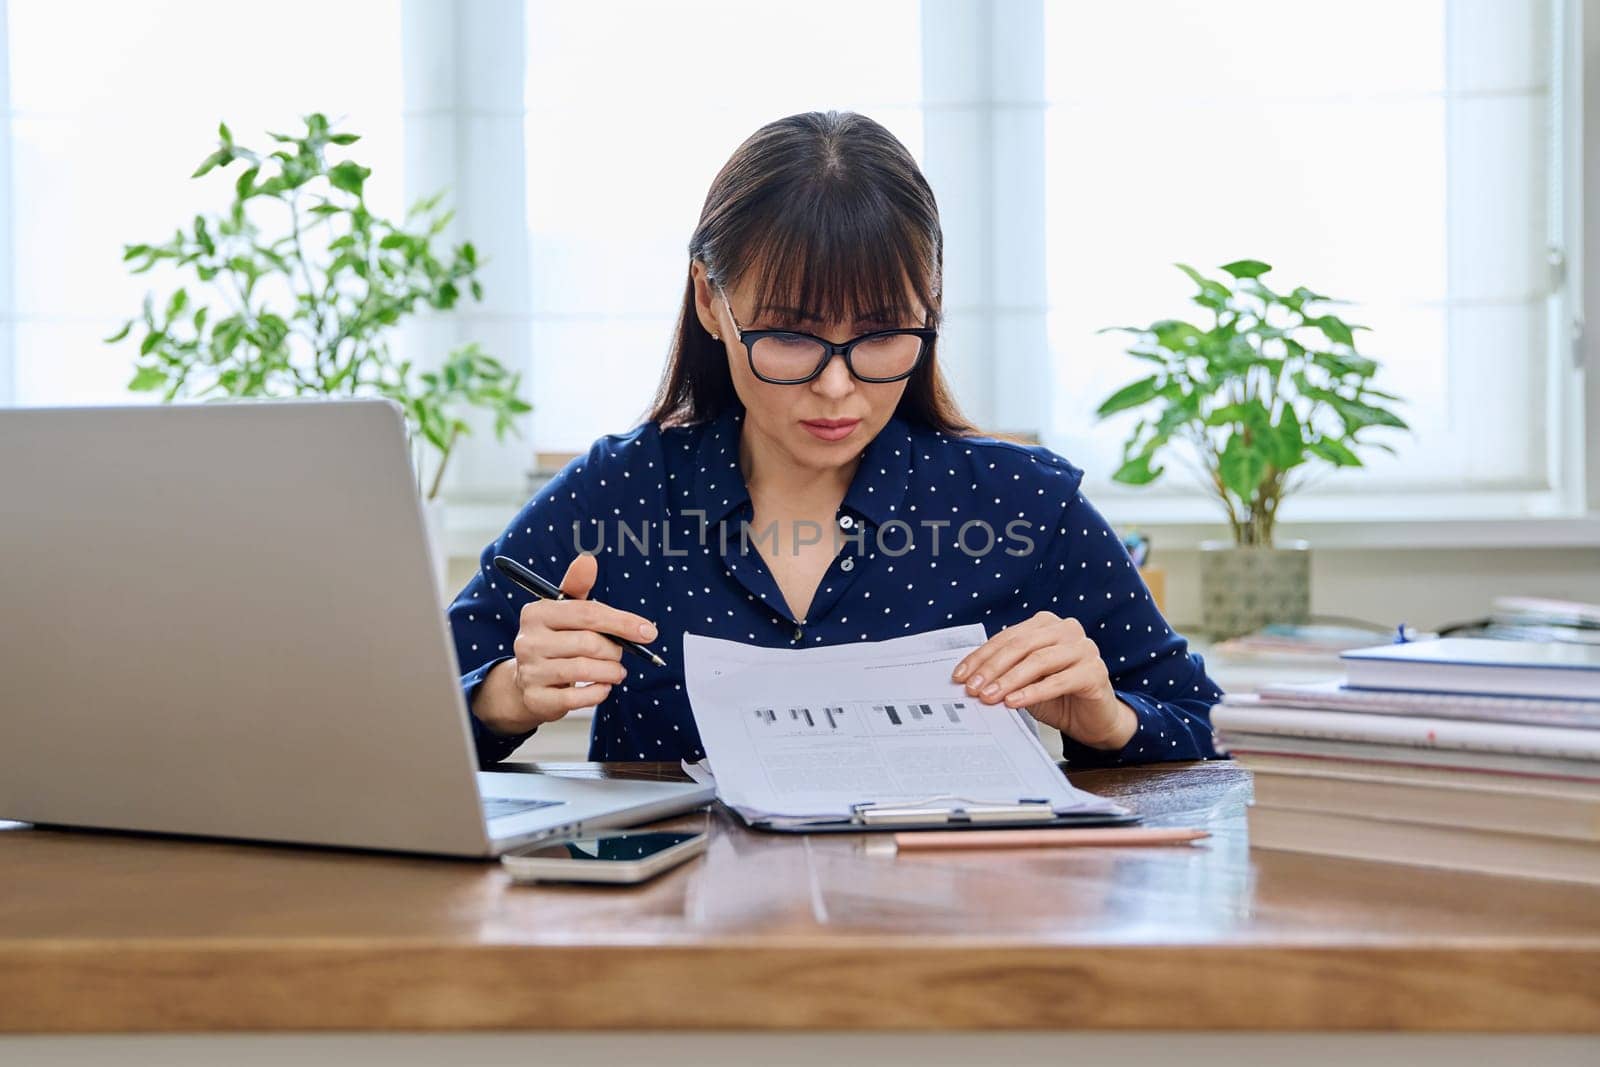 Middle-aged serious woman working with laptop computer with business papers, sitting at desk in home office interior. Work, remote business, freelance, technology, 40s people concept